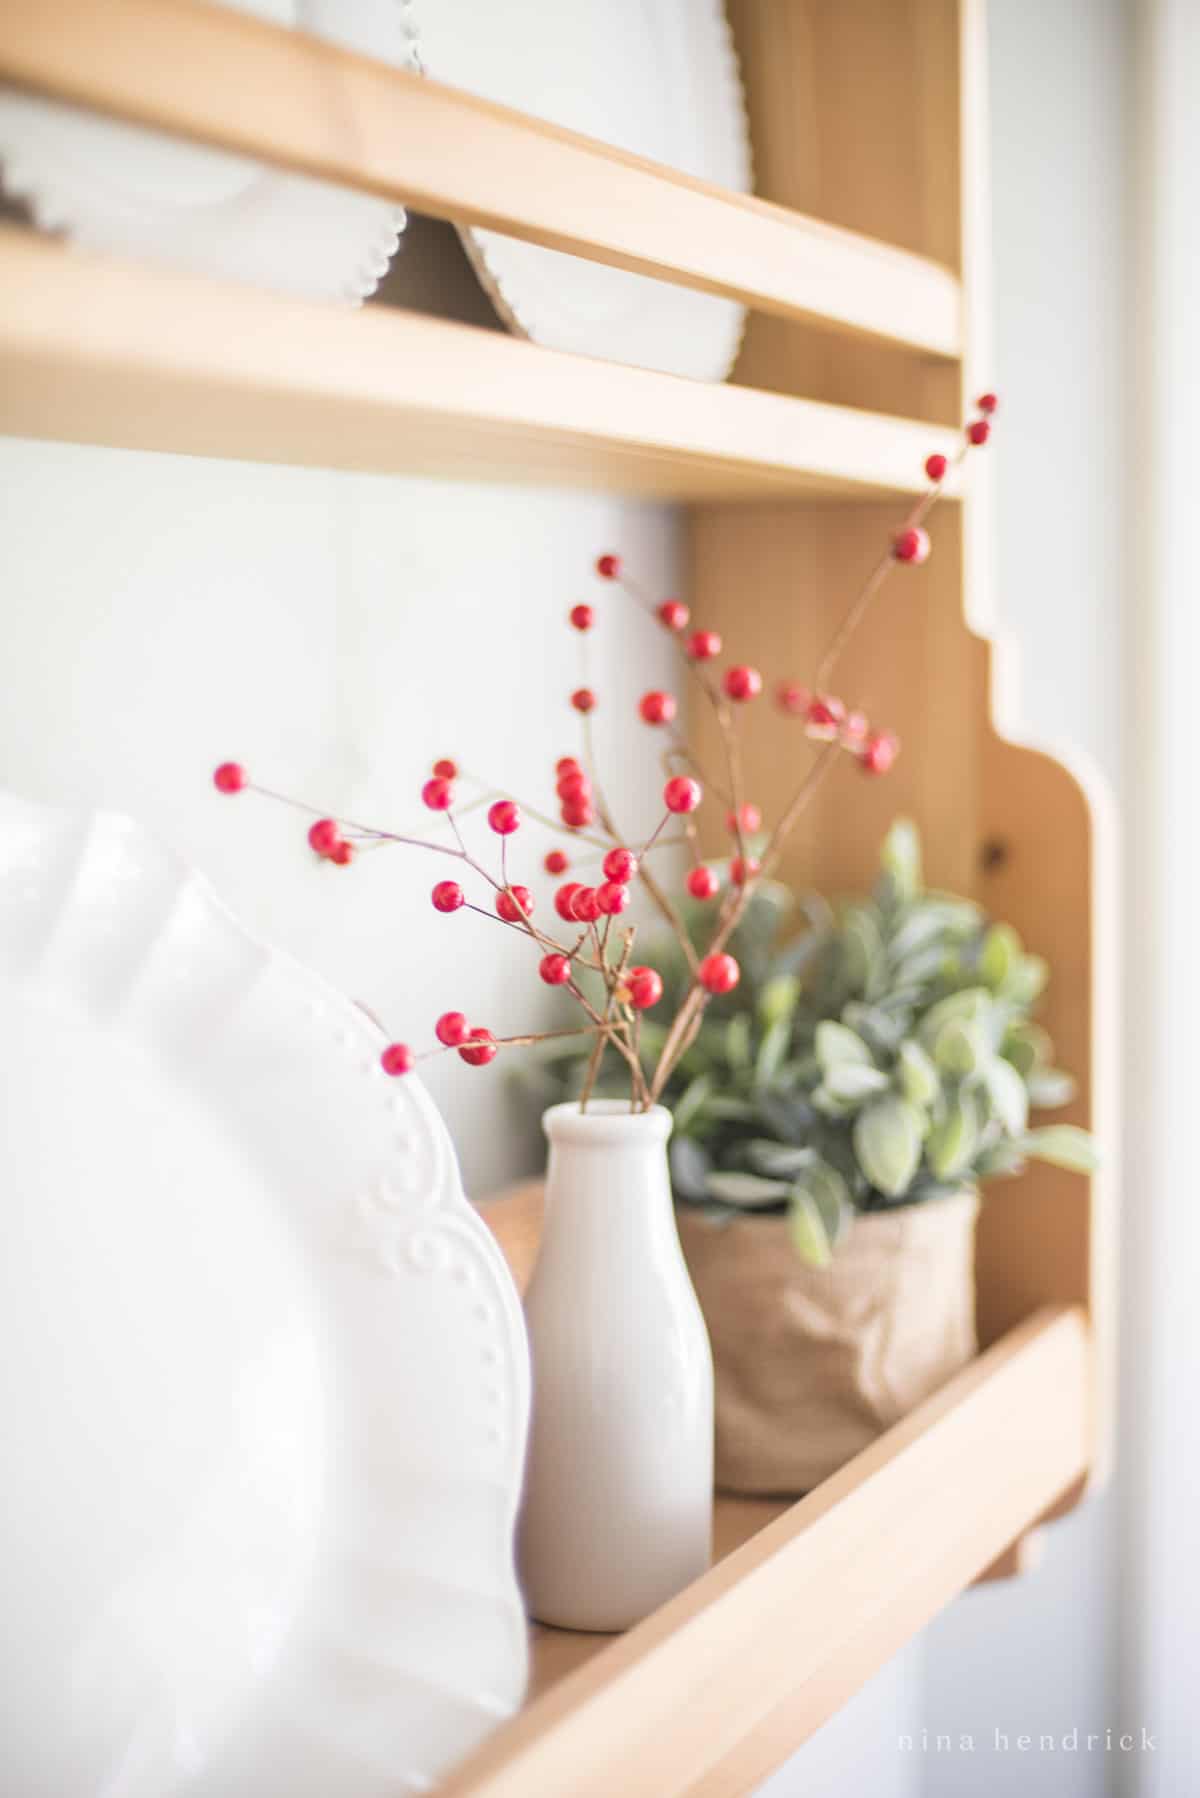 Red berries on a shelf with stark white plates and greenery